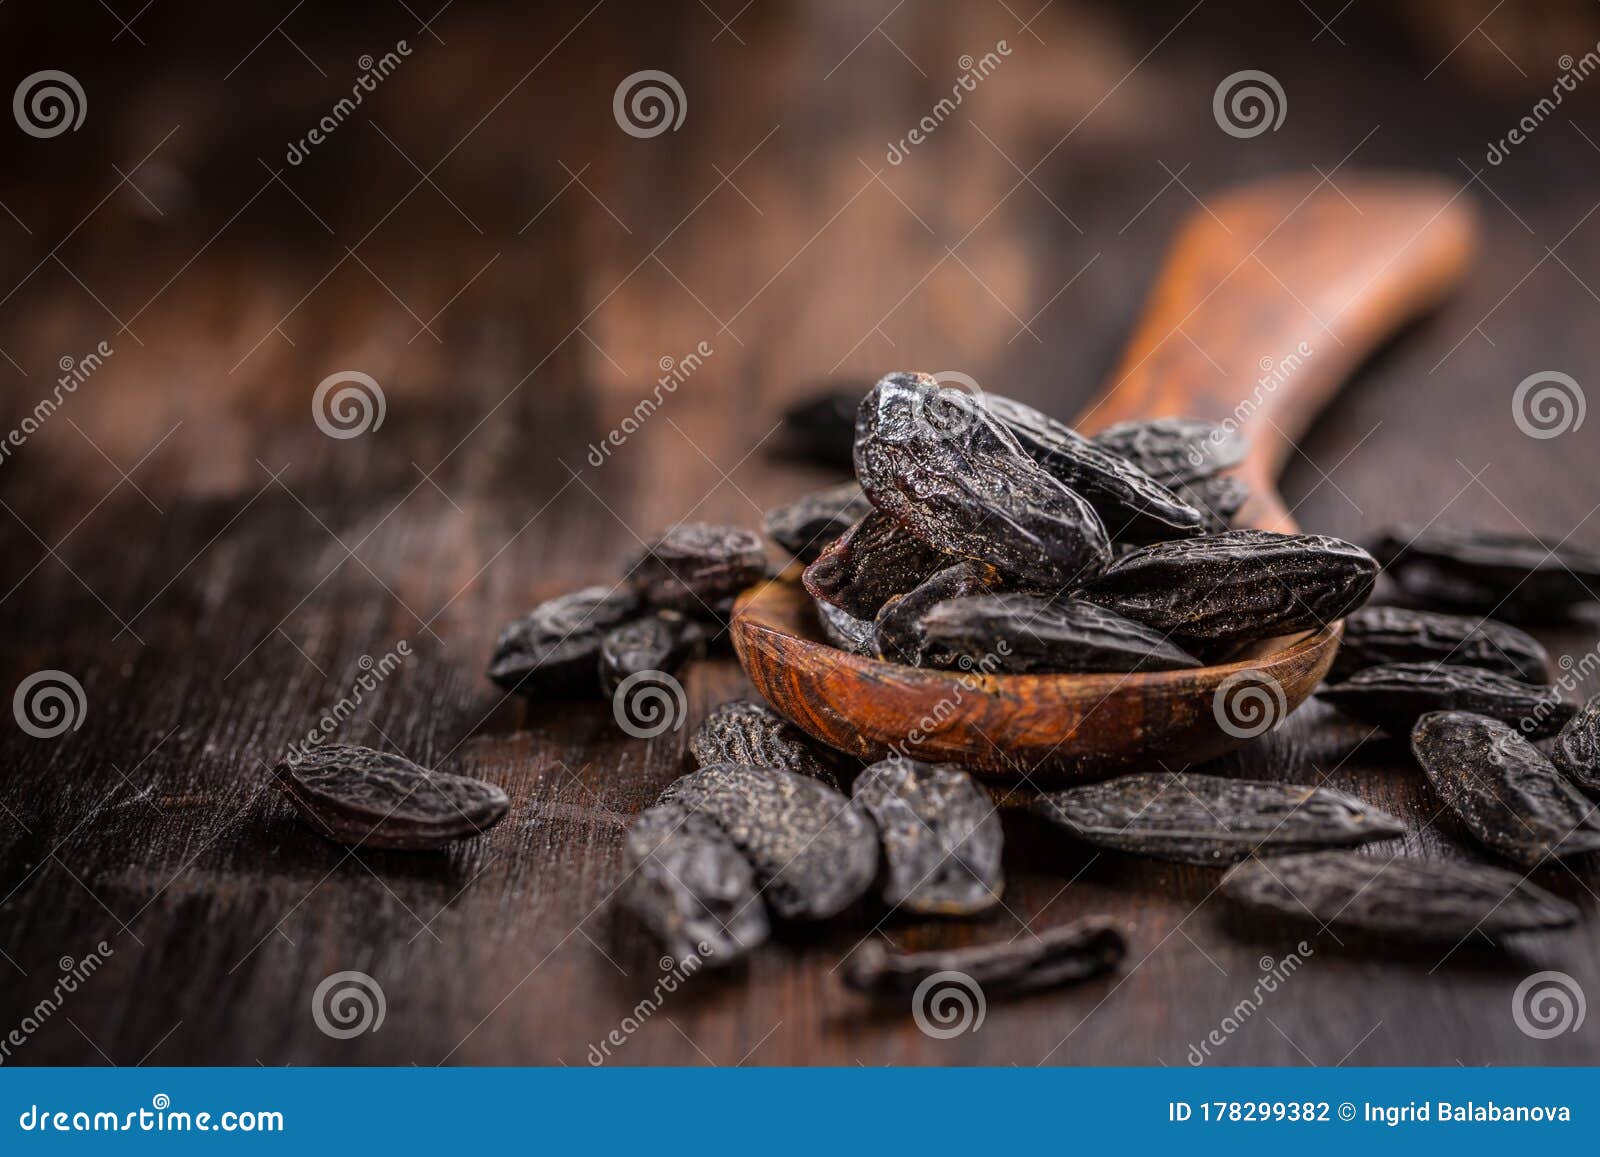 fragrant tonka beans for baking and cooking